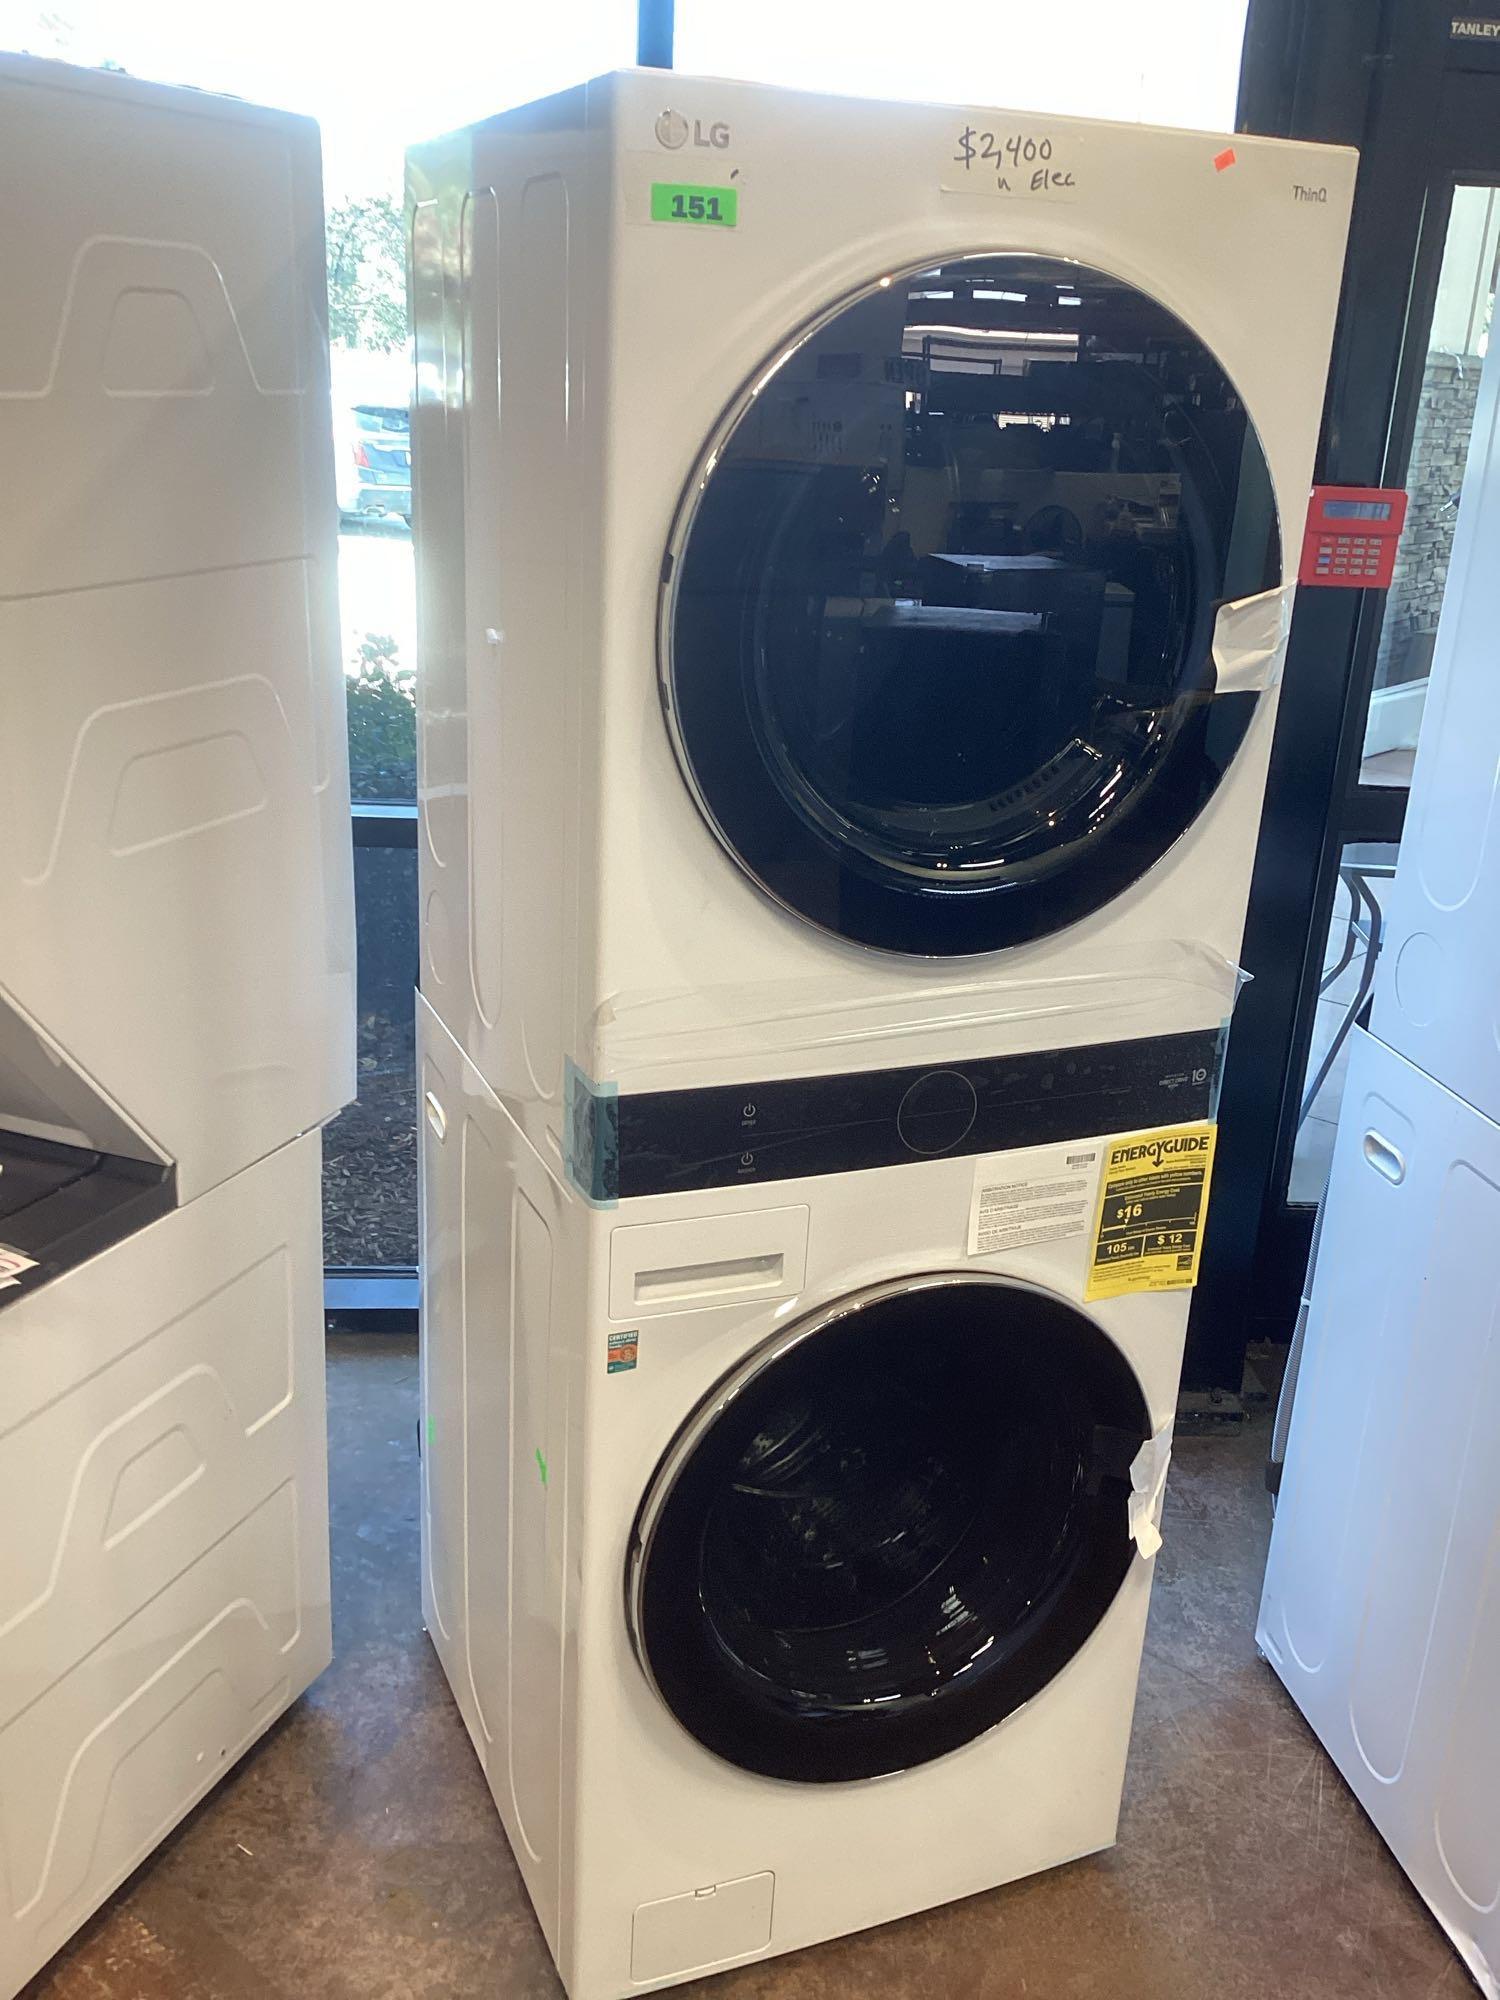 LG 4.5 cu. ft. Smart Front Load Washer and 7.4 cu. ft. Electric Dryer WashTower*UNUSED*